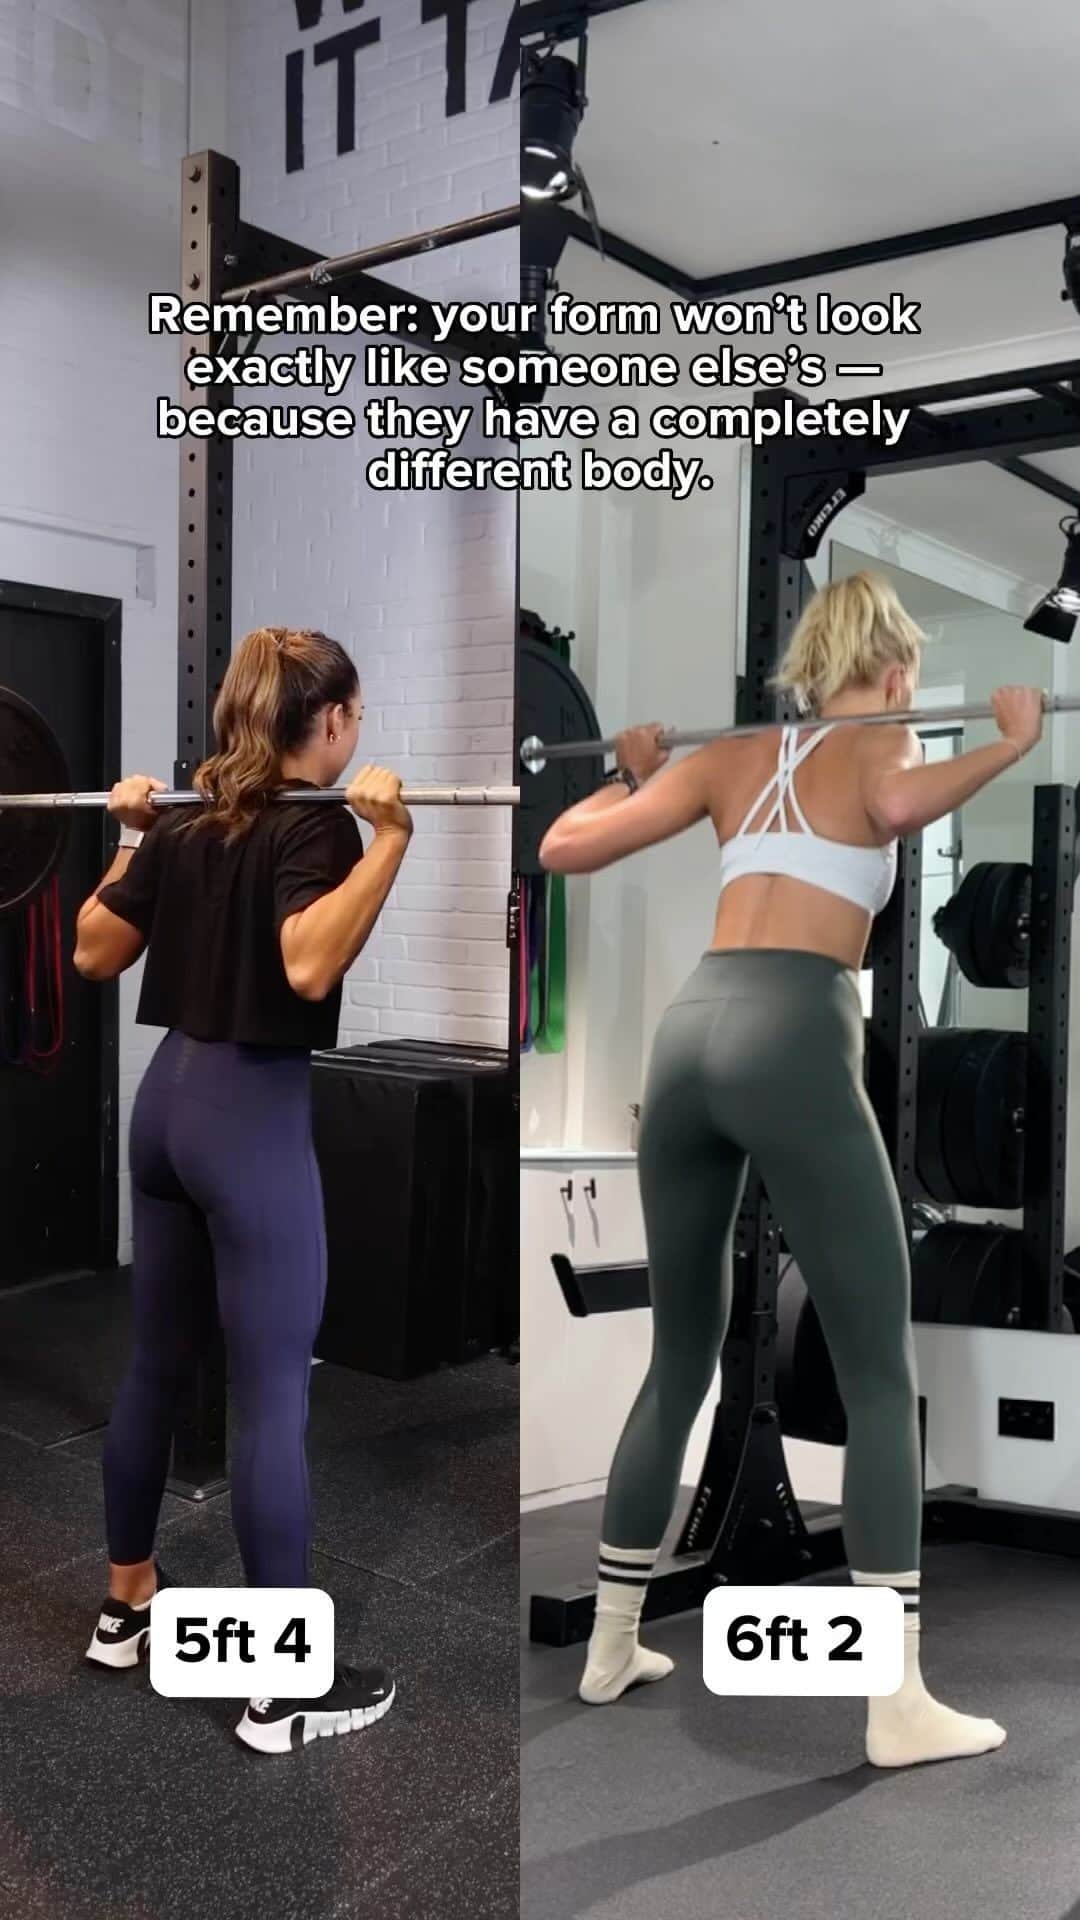 Zanna Van Dijkのインスタグラム：「While form when lifting weights is incredibly important  … “correct form” does not look the same on everyone.   @thefoodmedic & @zannavandijk are both moving safely & effectively but have different squat mechanics because of their differences in height and anthropometry.  And that’s fine!  The gym becomes less intimidating when you accept that your form may not resemble the person next to you — and it’s not supposed to.  #bestfriends #squat #form #technique #gymvideos #lifting」